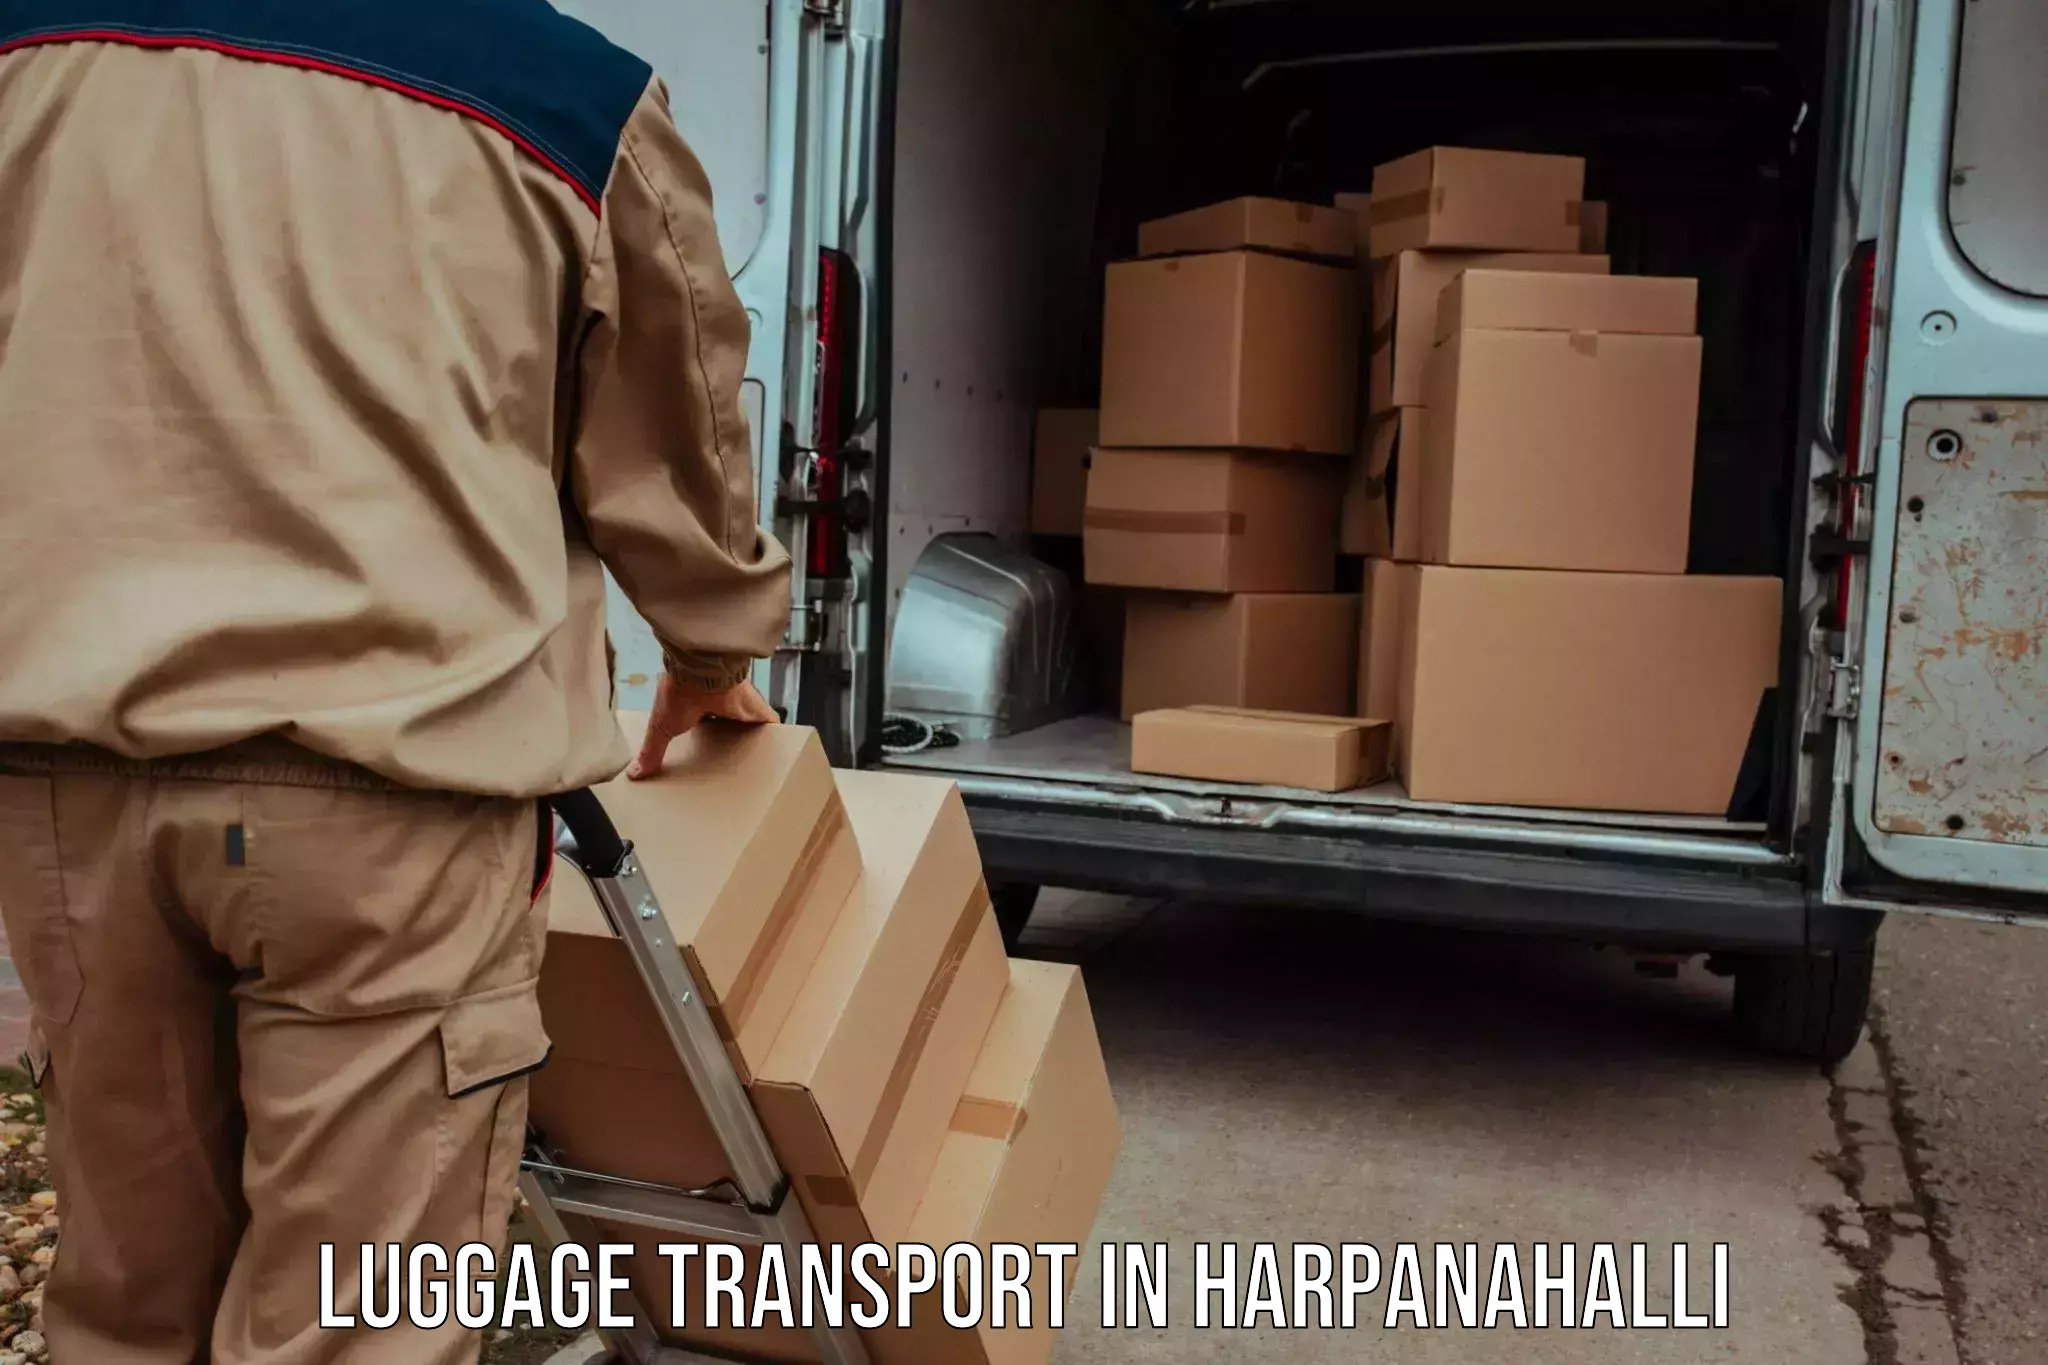 Group luggage shipping in Harpanahalli